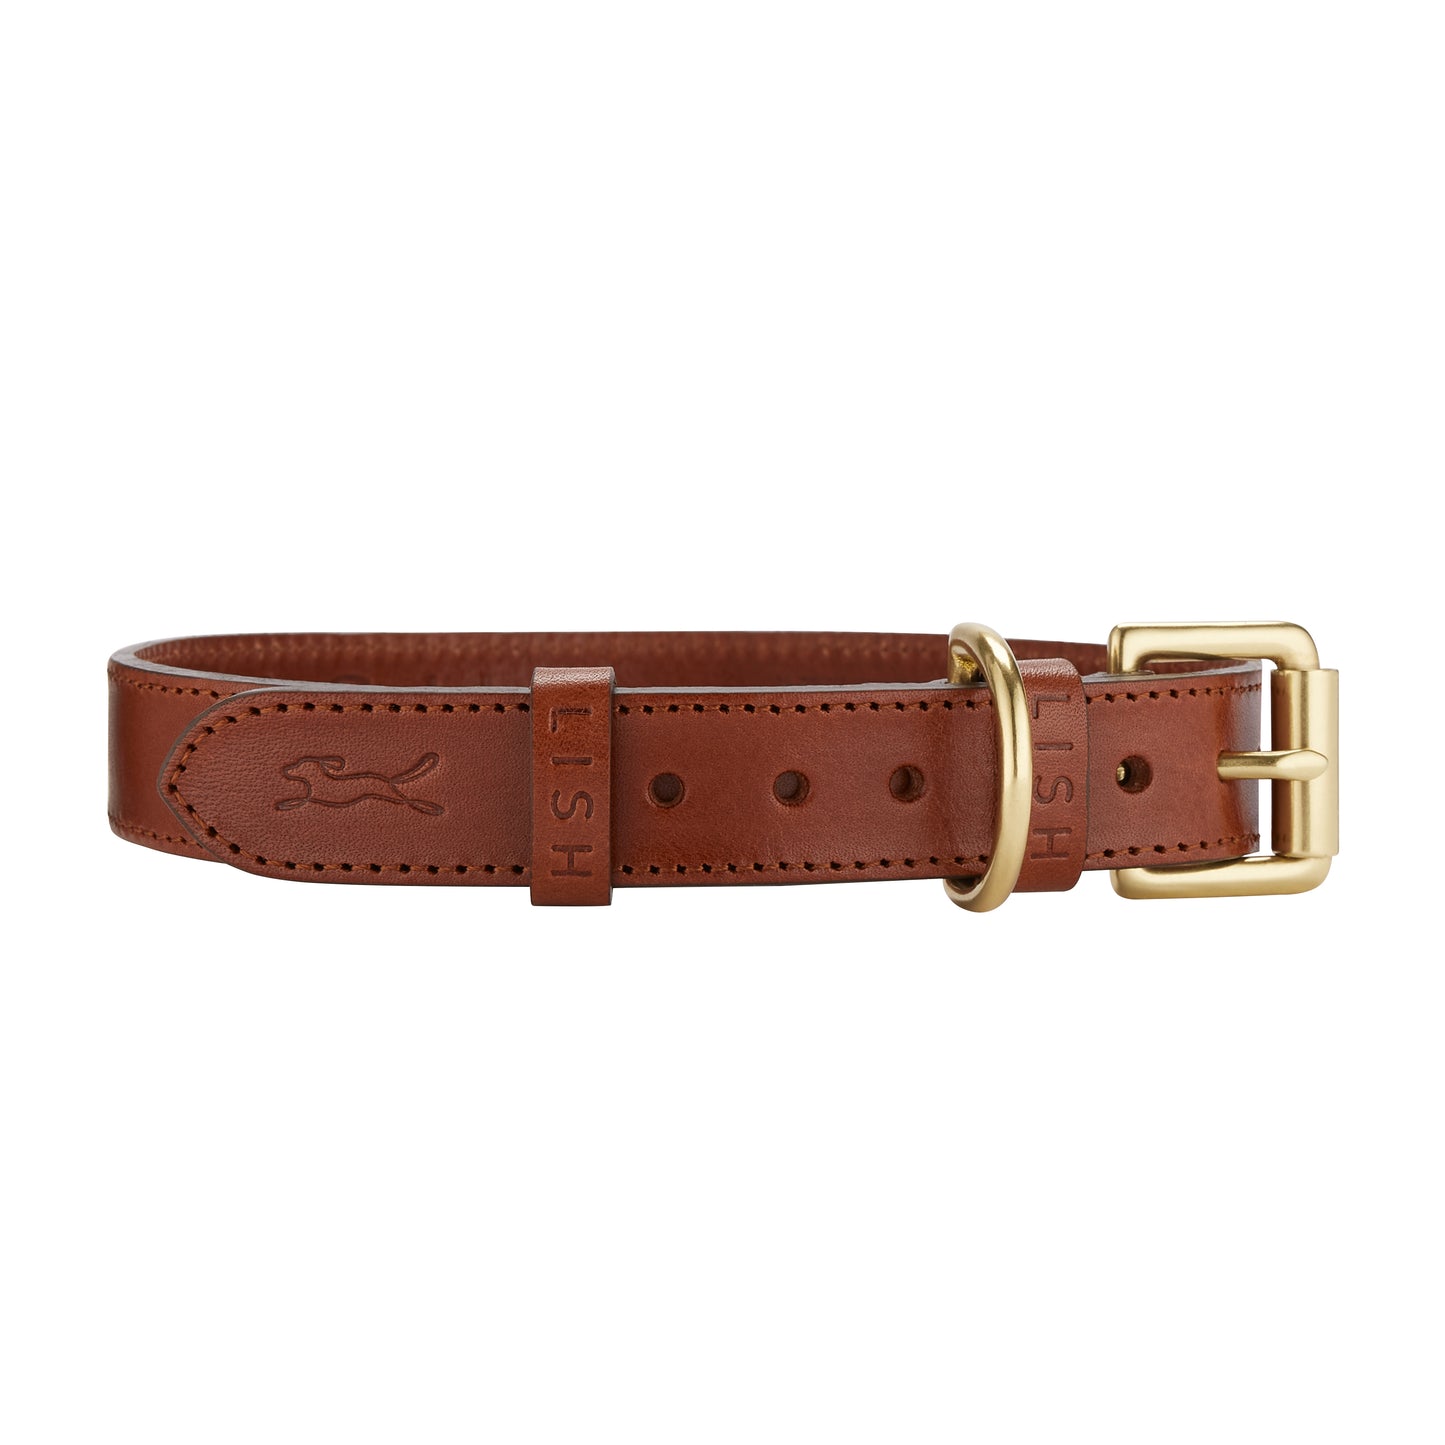 Coopers Toffee Brown Italian Leather Dog Collar